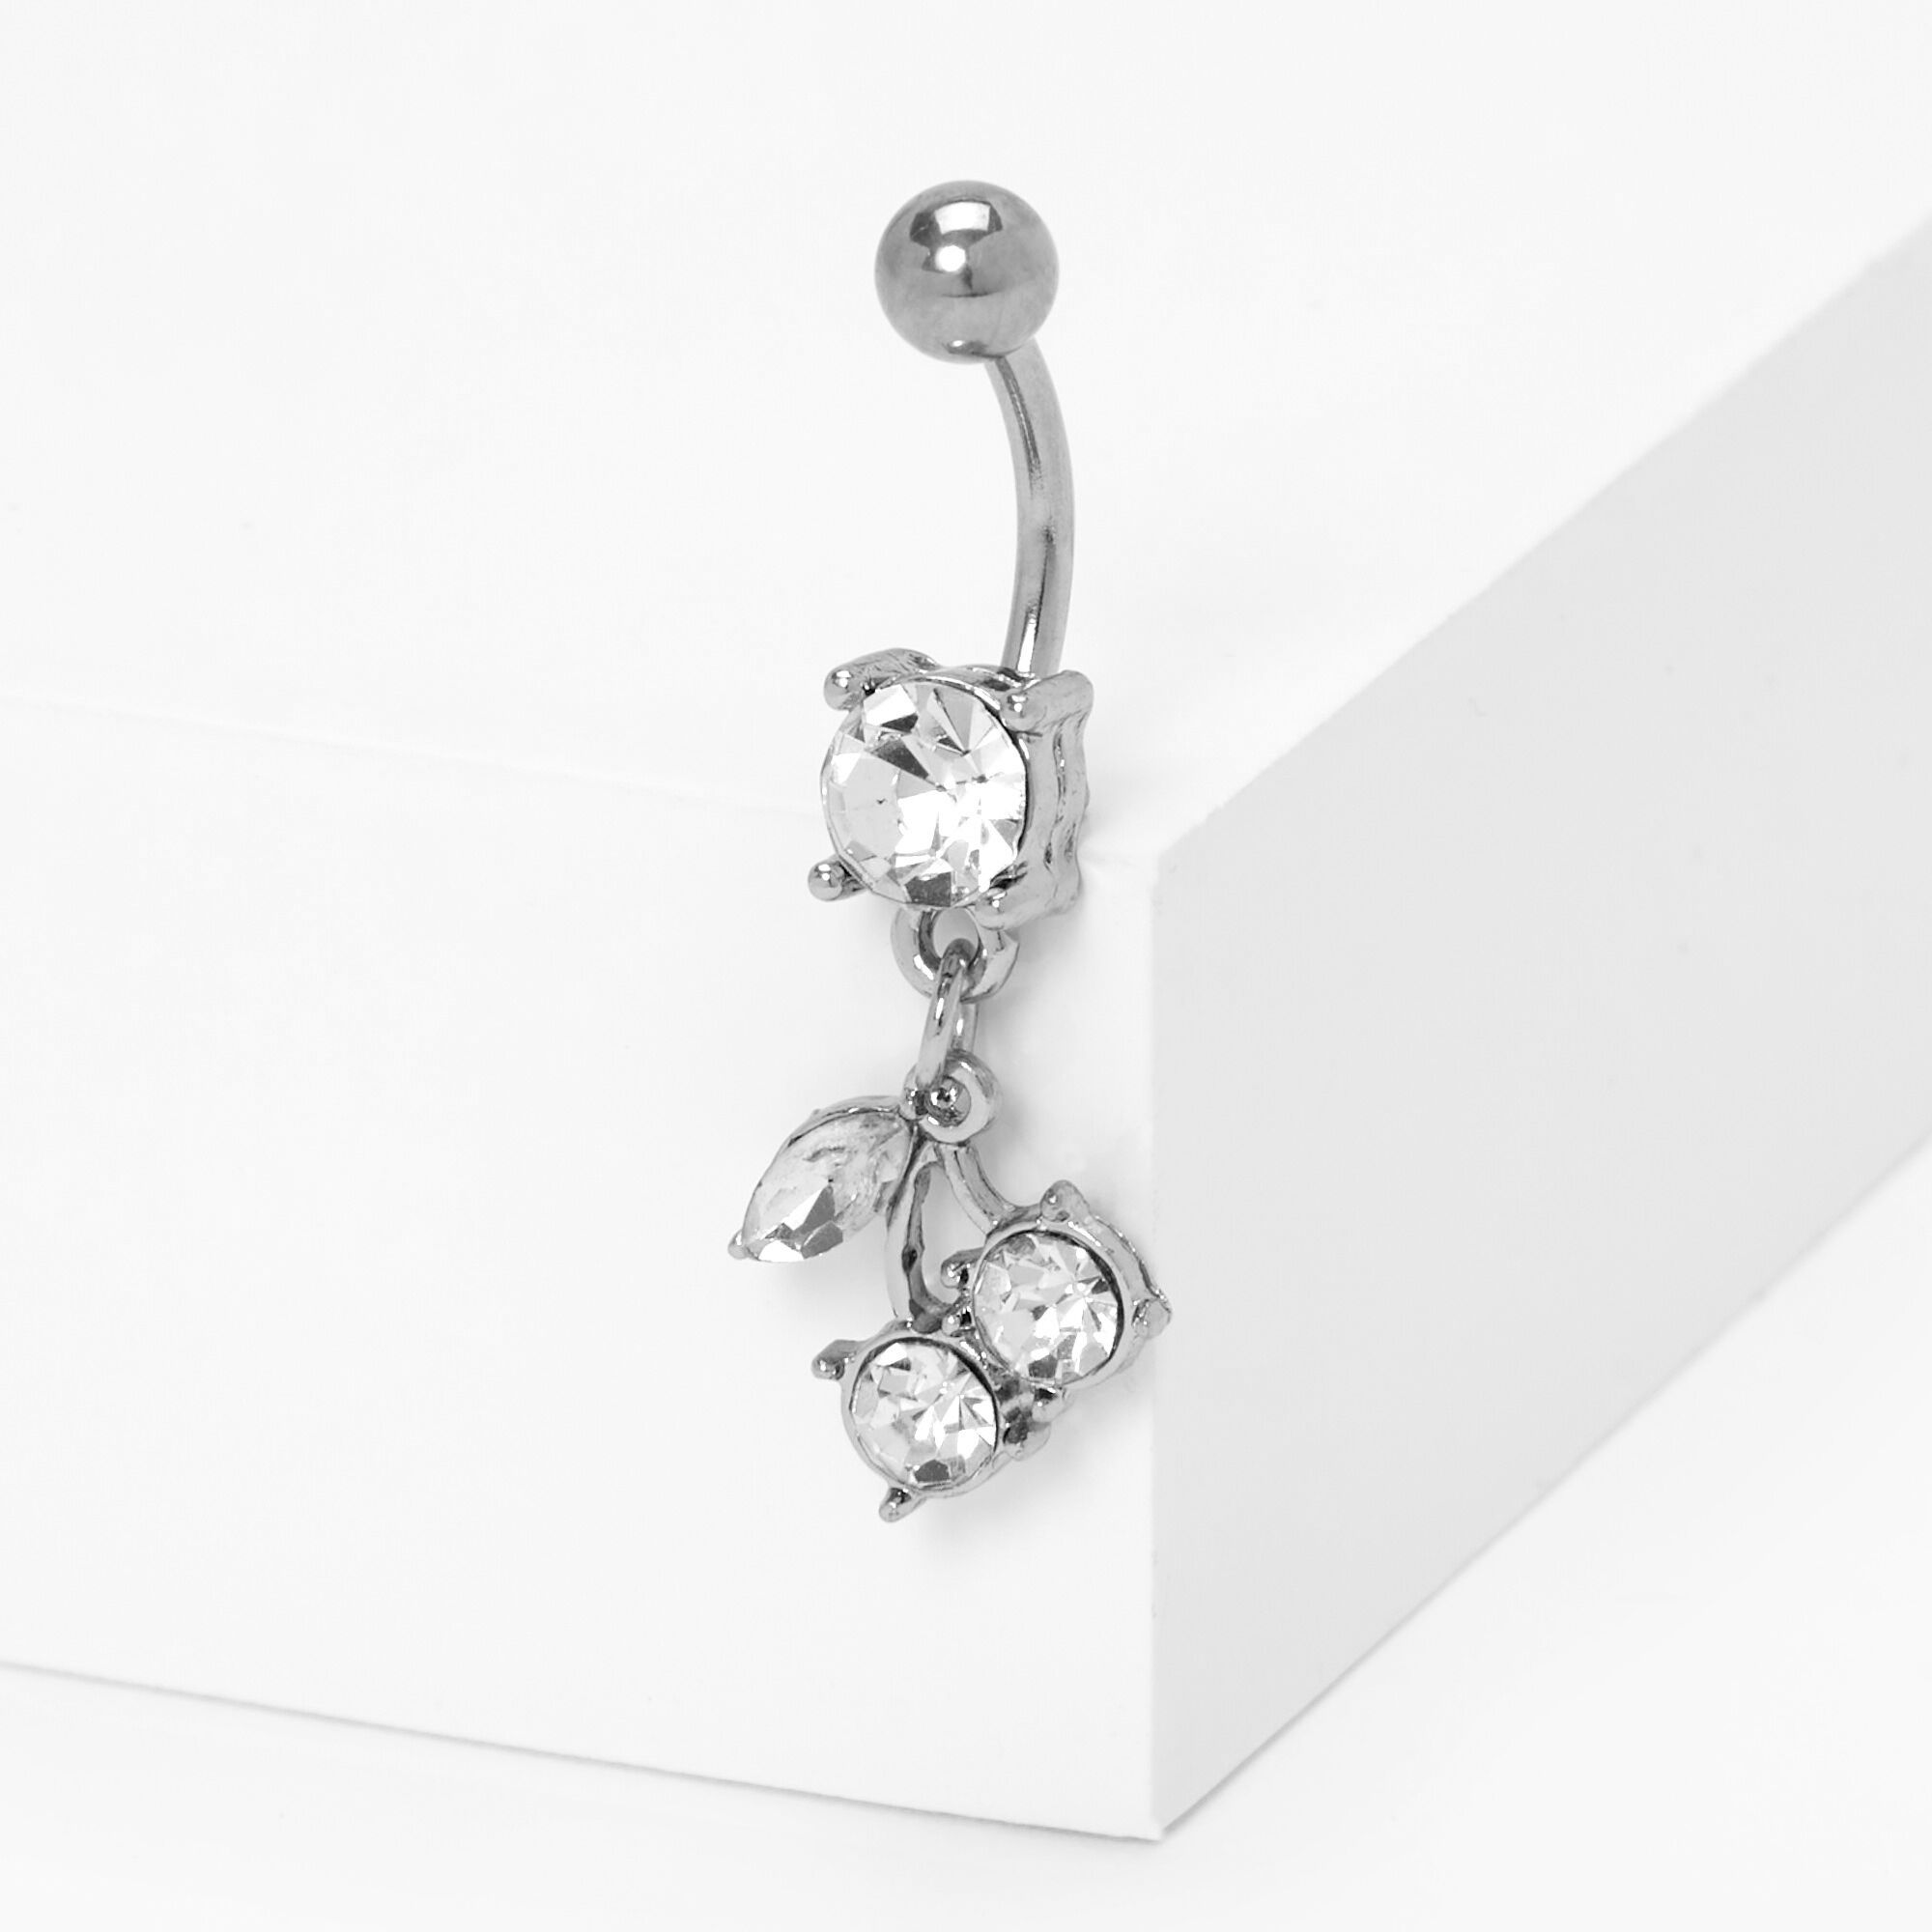 View Claires Tone 14G Embellished Cherry Dangle Belly Ring Silver information